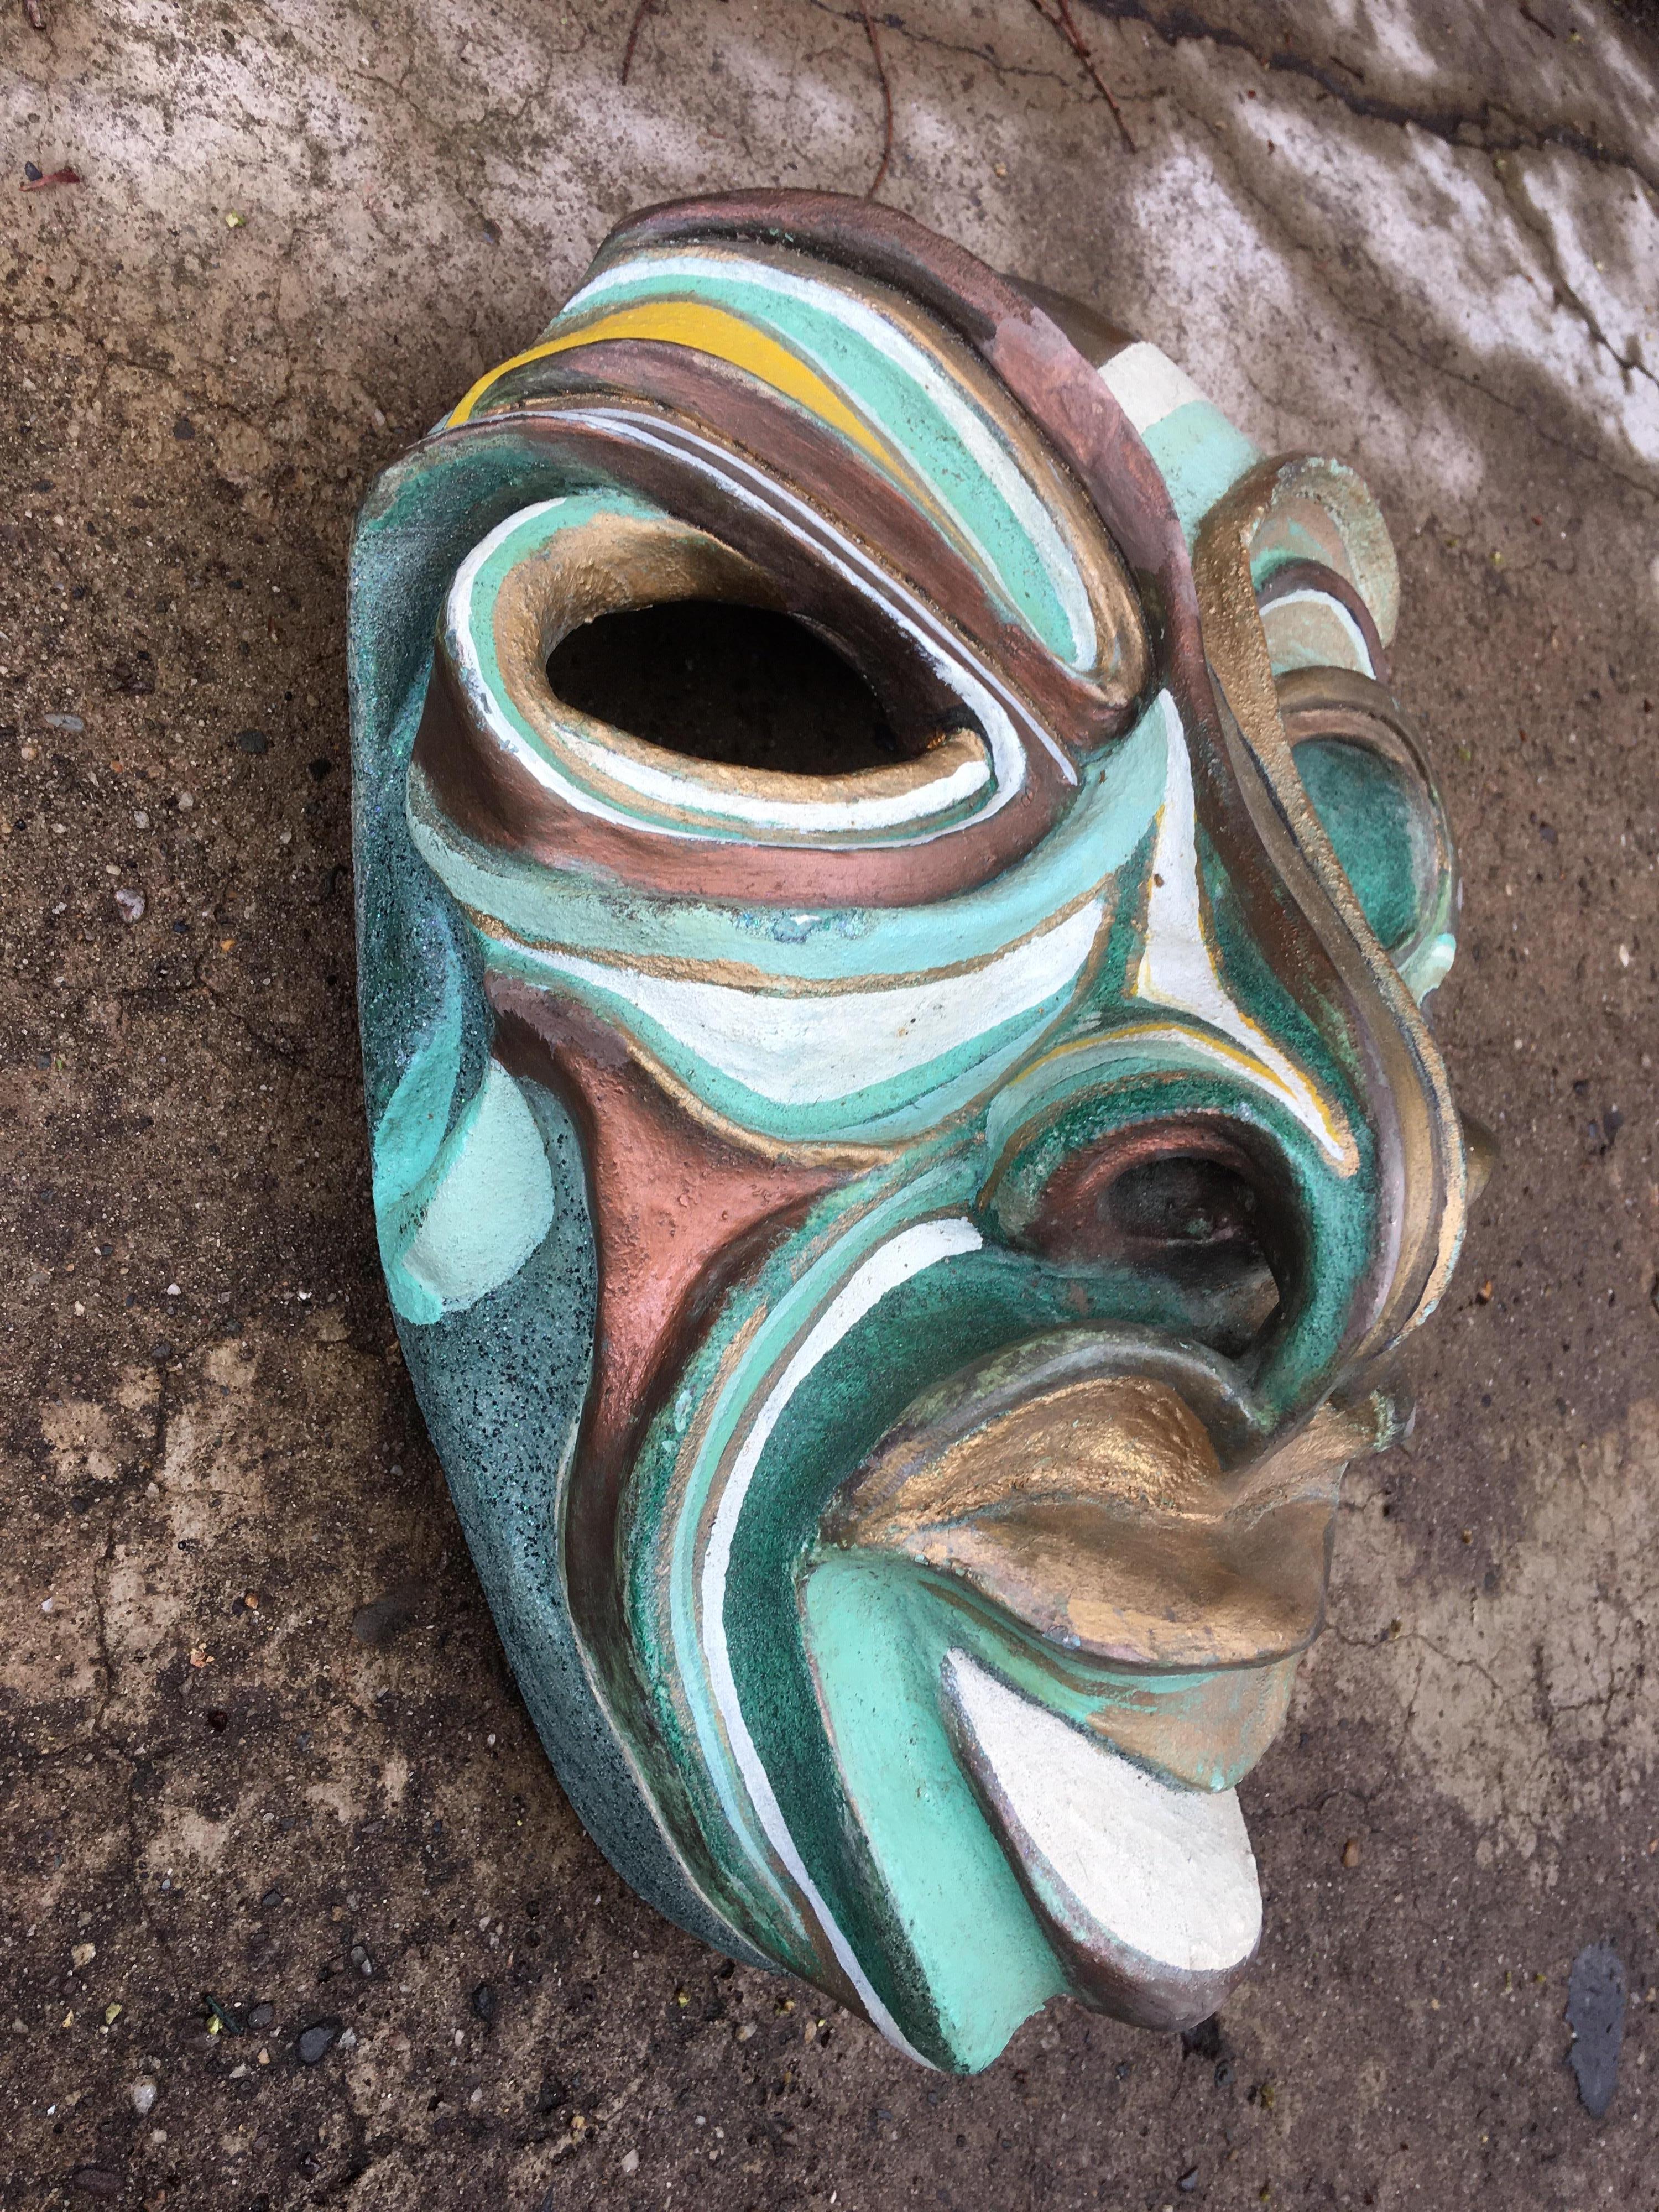 Harry Matias, Brooklyn NY late 1980s hand-built and painted mask. Great colors! Very dramatic image and style!